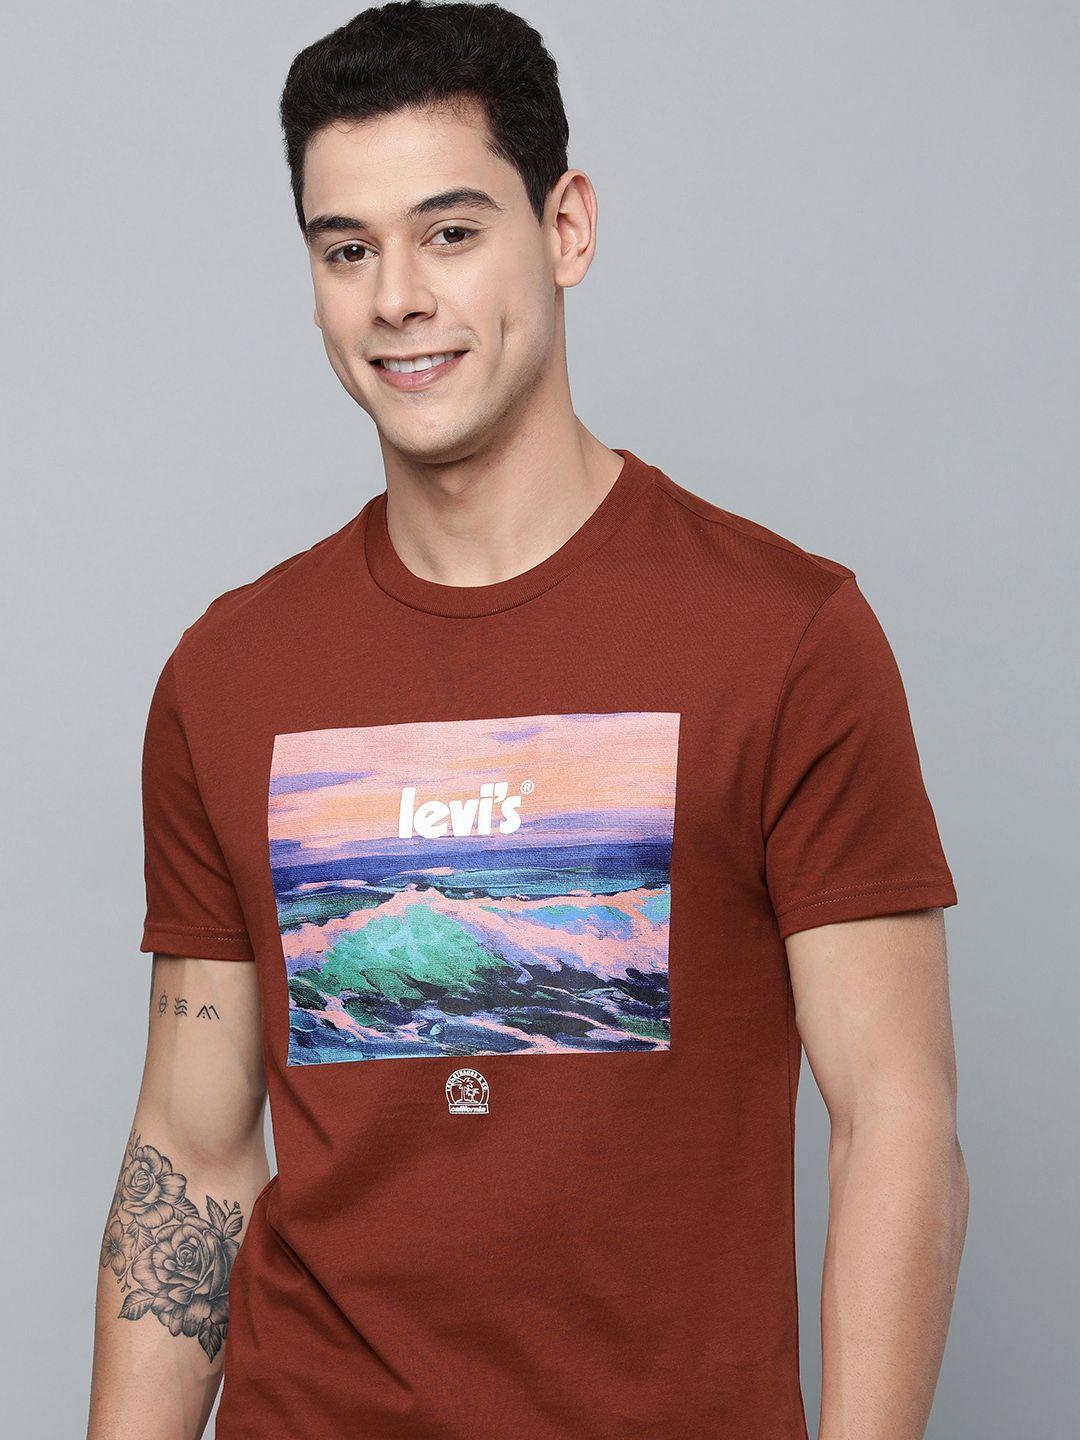 levis-men-red-printed-pure-cotton-t-shirt